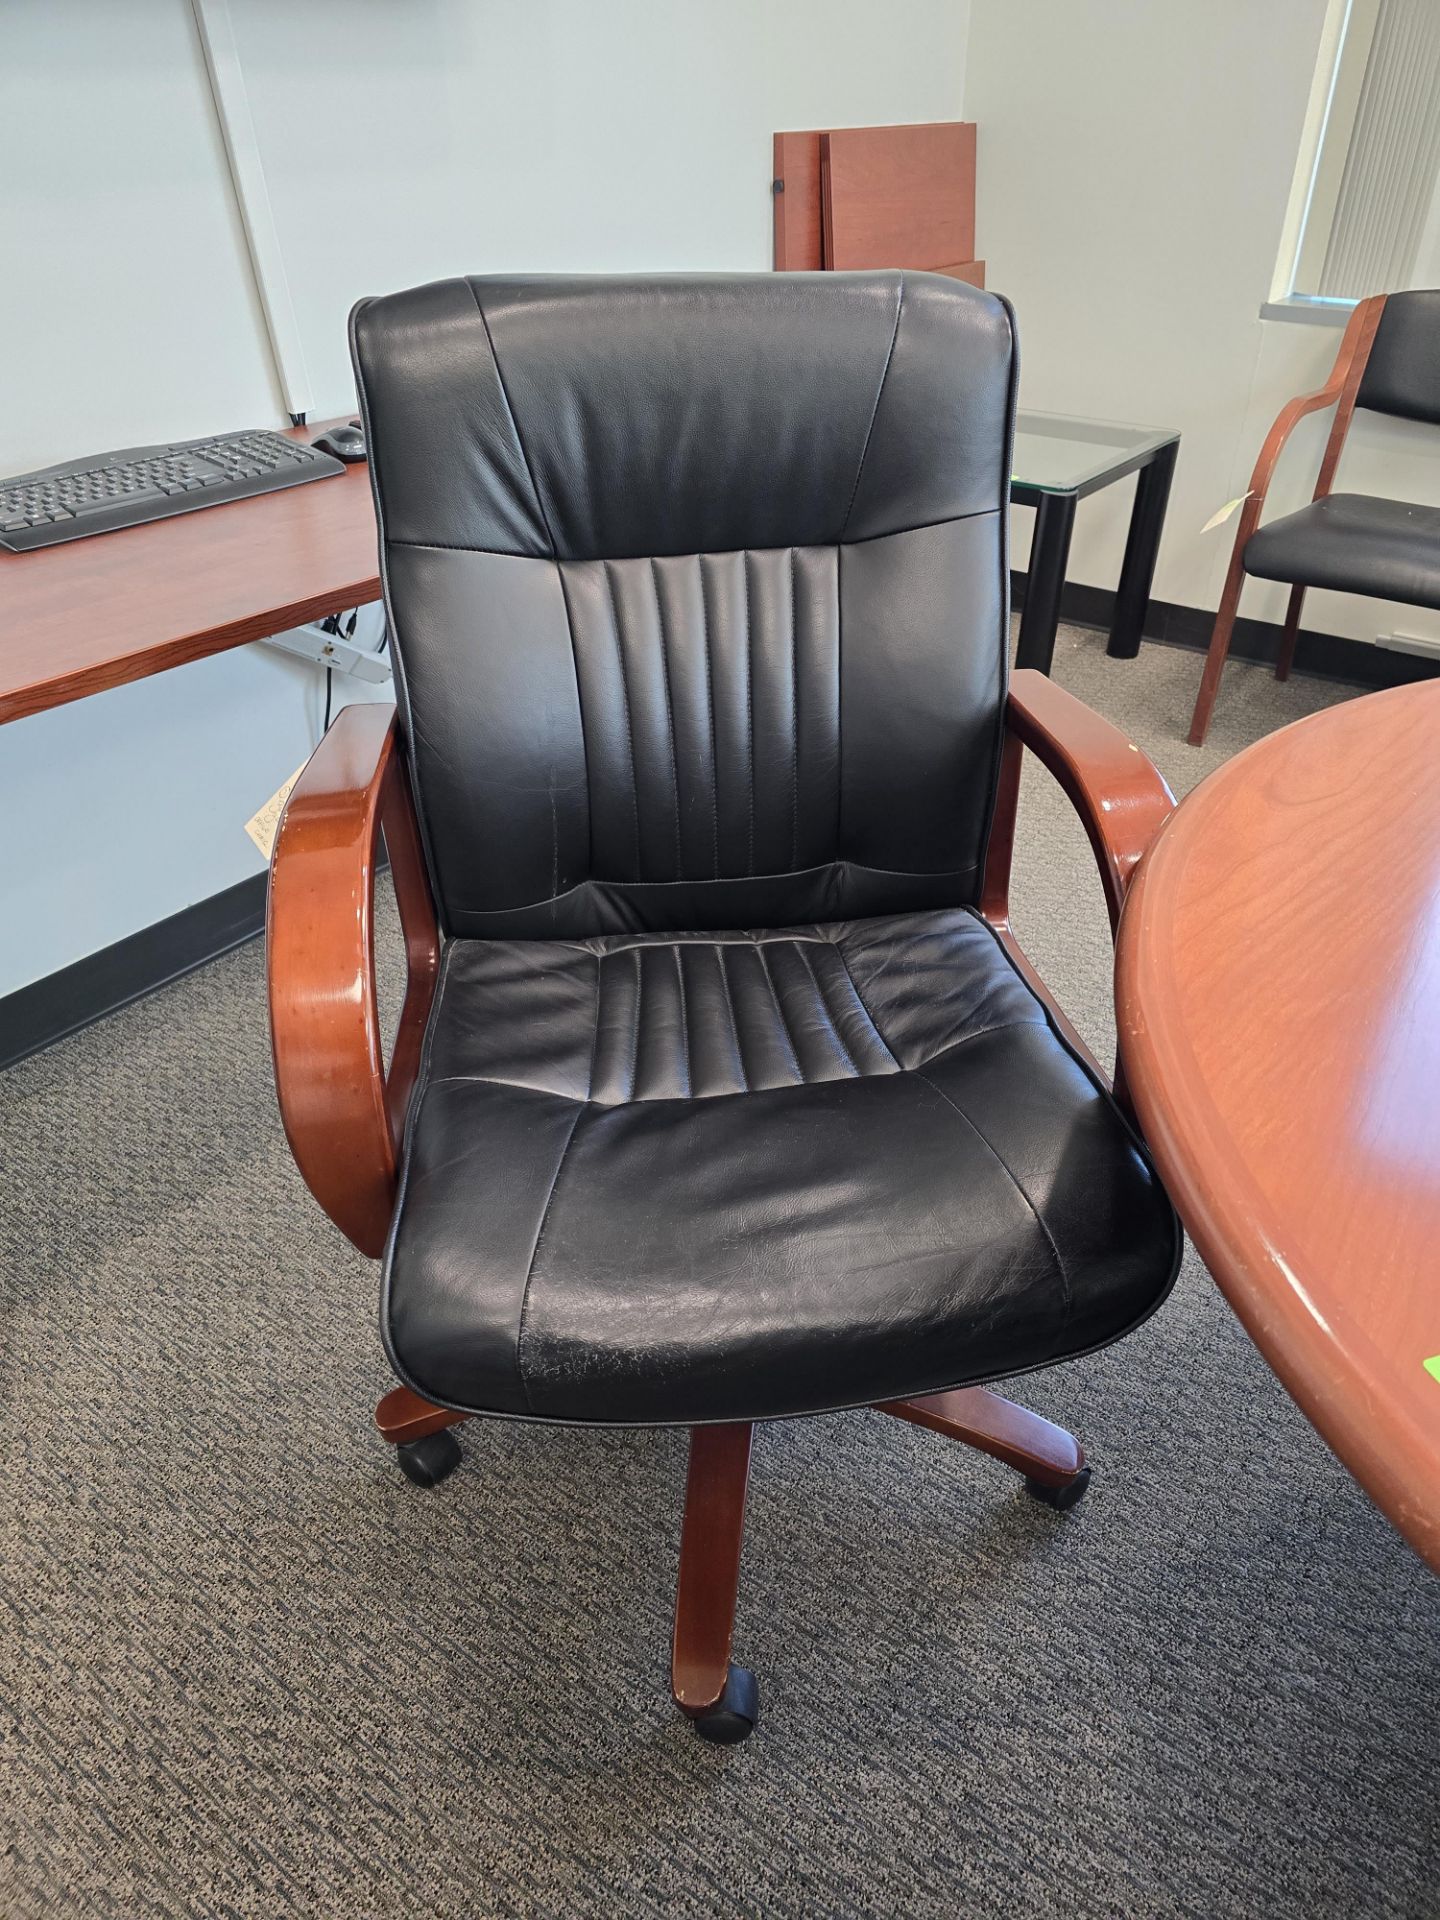 BLACK BROWN OFFICE CHAIR - Image 2 of 2